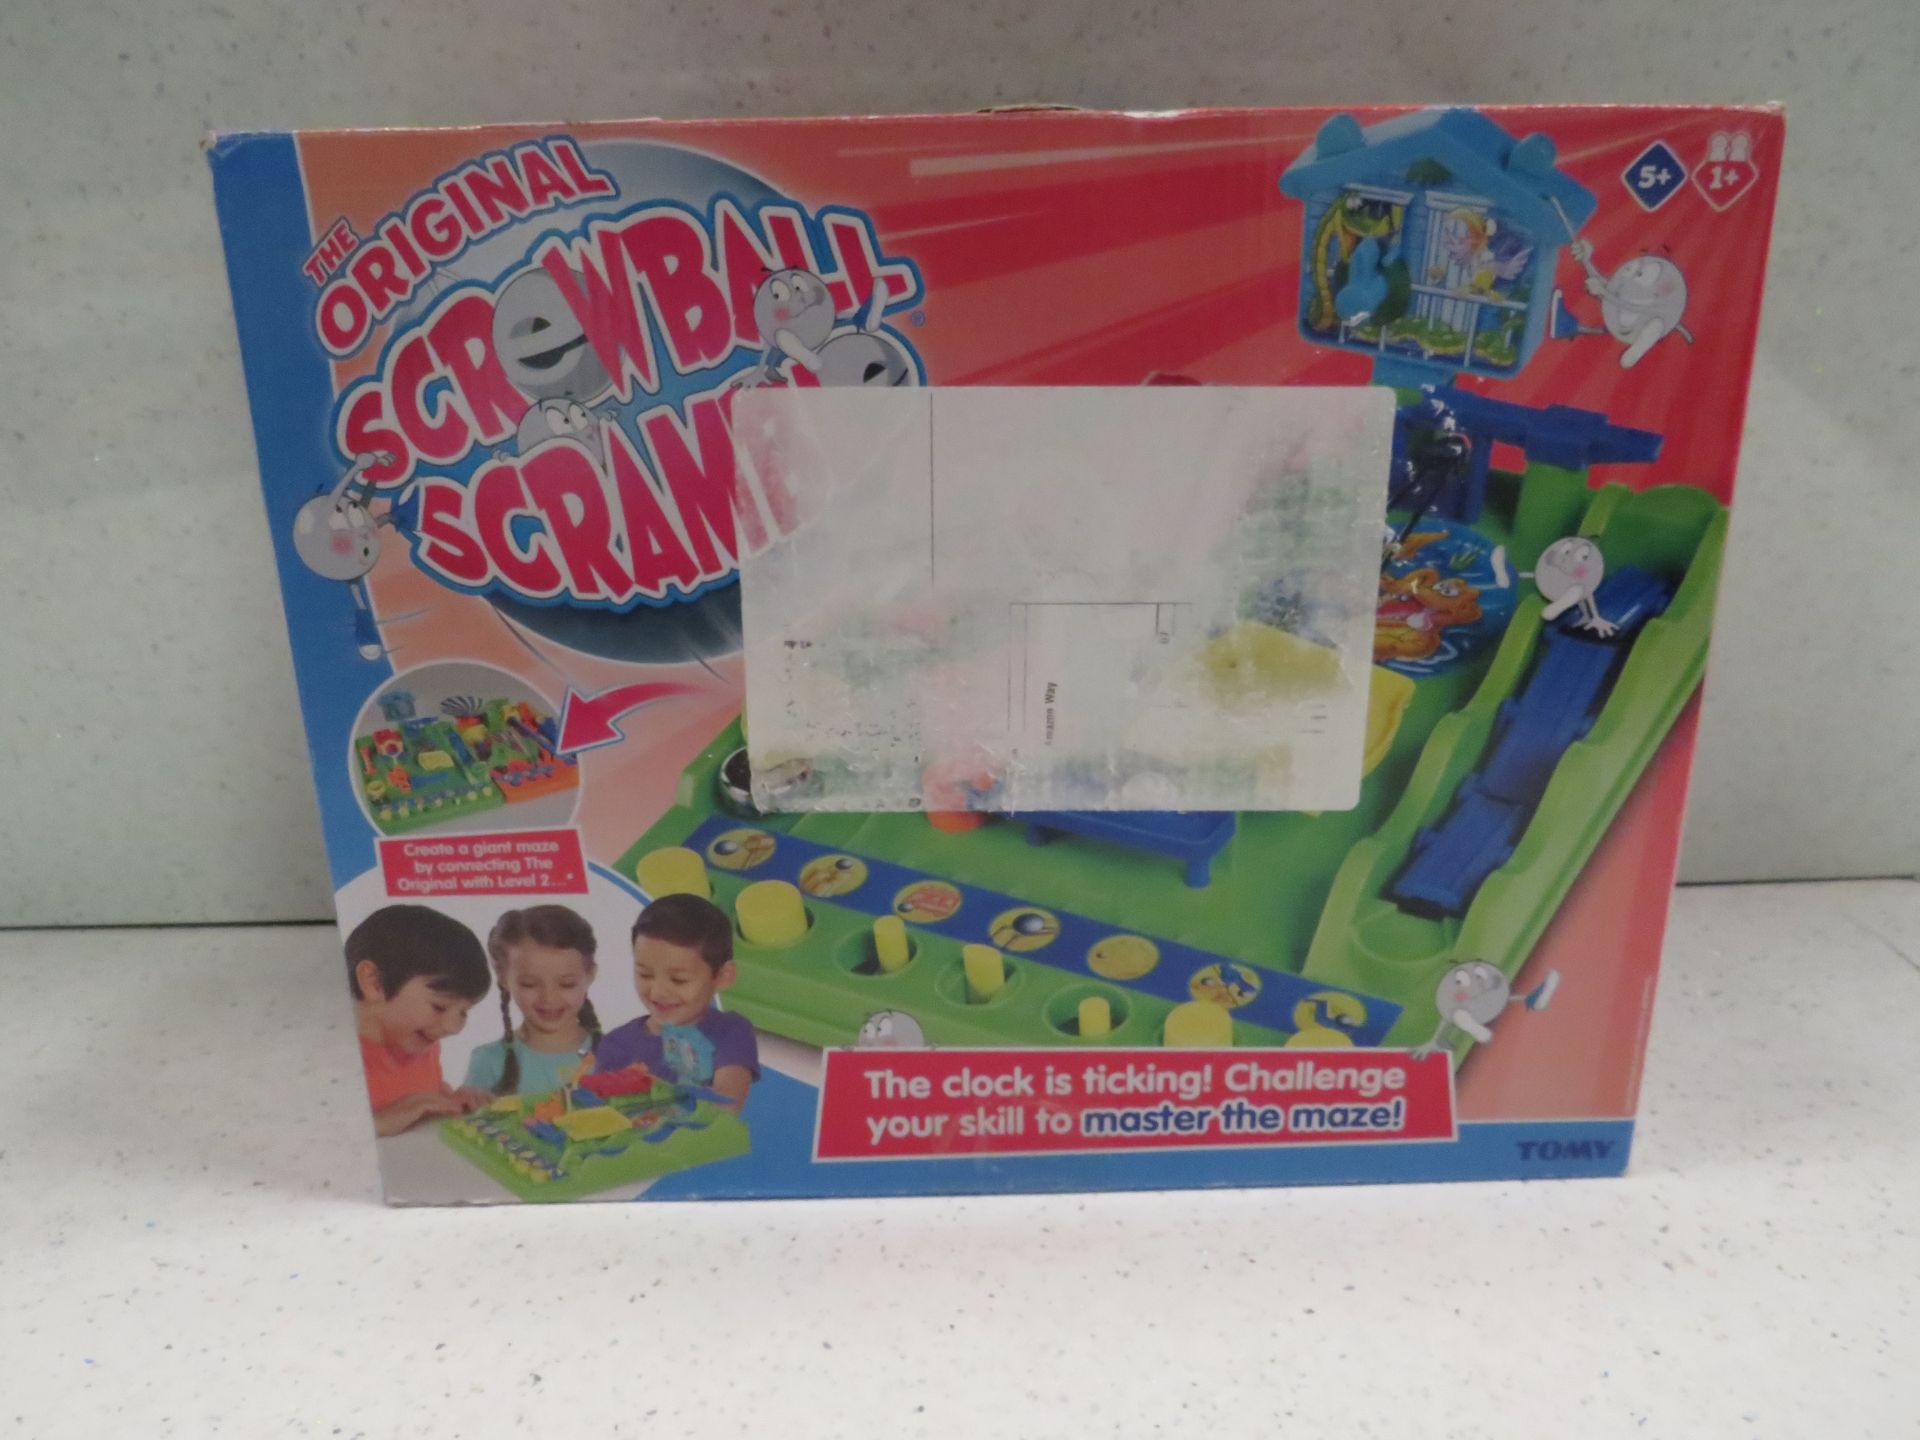 Tomy - The Original Screwball Scrammble - Unchecked & Boxed.